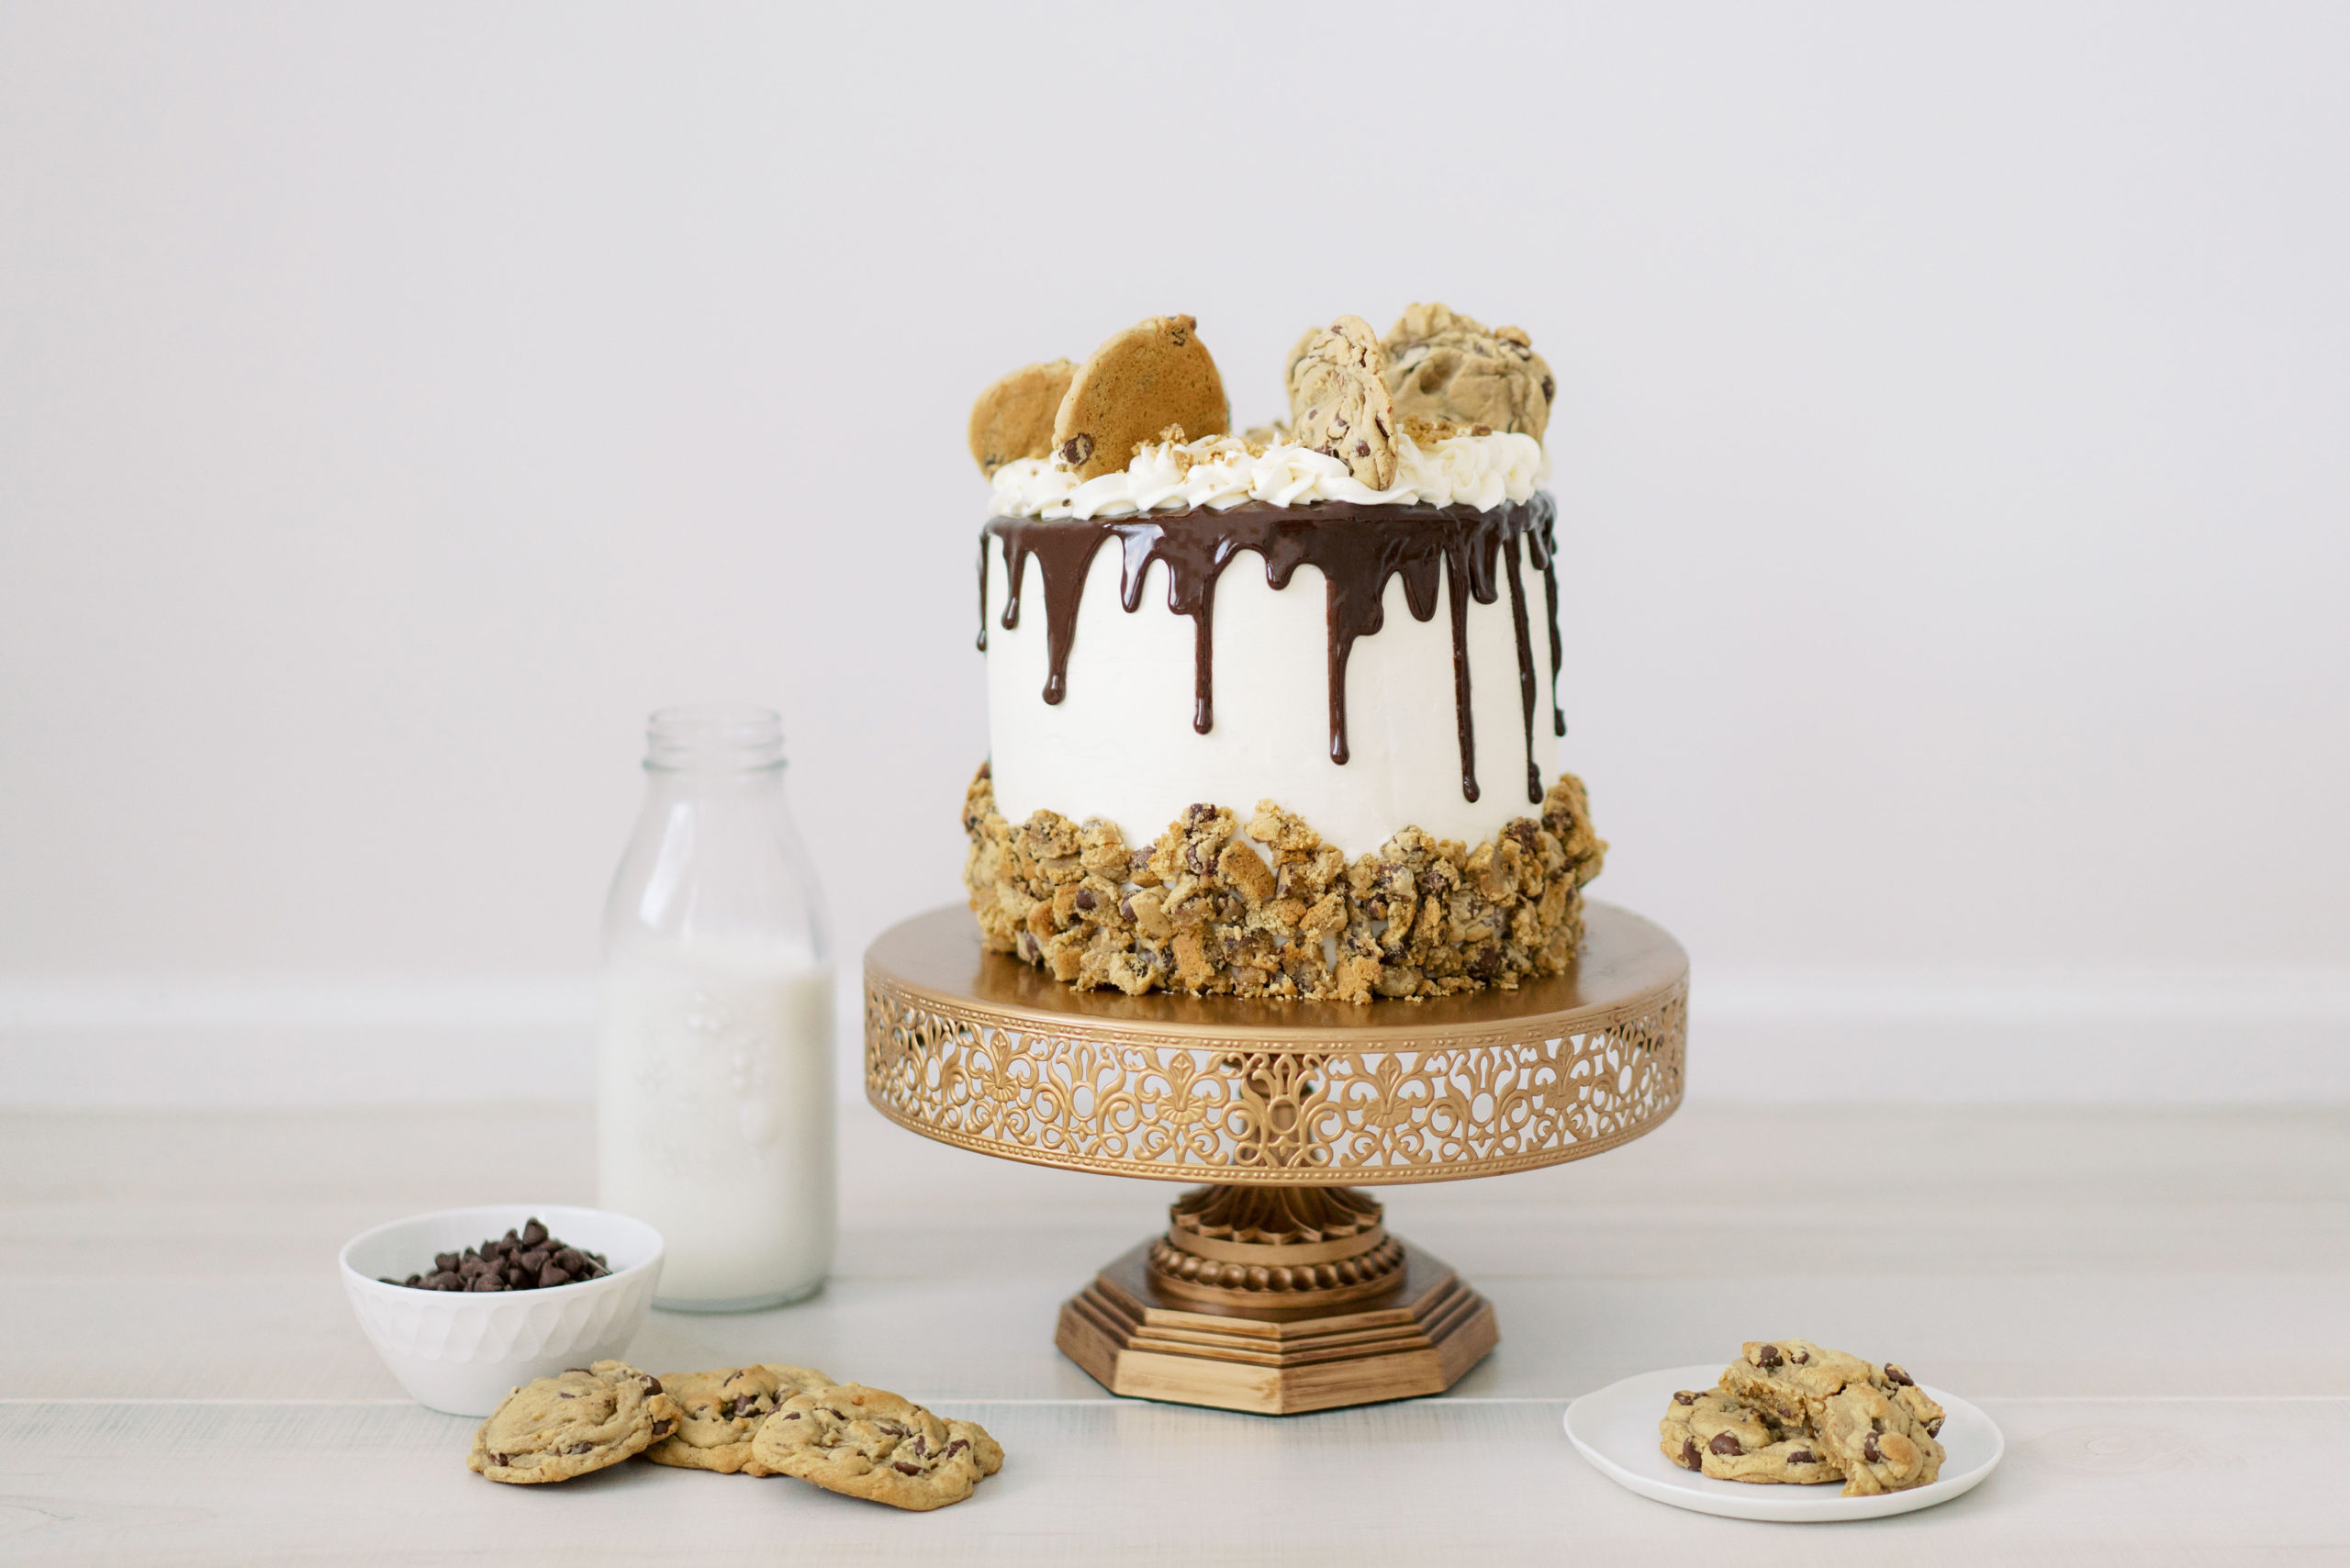 An incredible 3-layer Chocolate Chip Cookie Cake, featuring homemade cookies, a delicious vanilla buttercream, and chocolate chip cake!